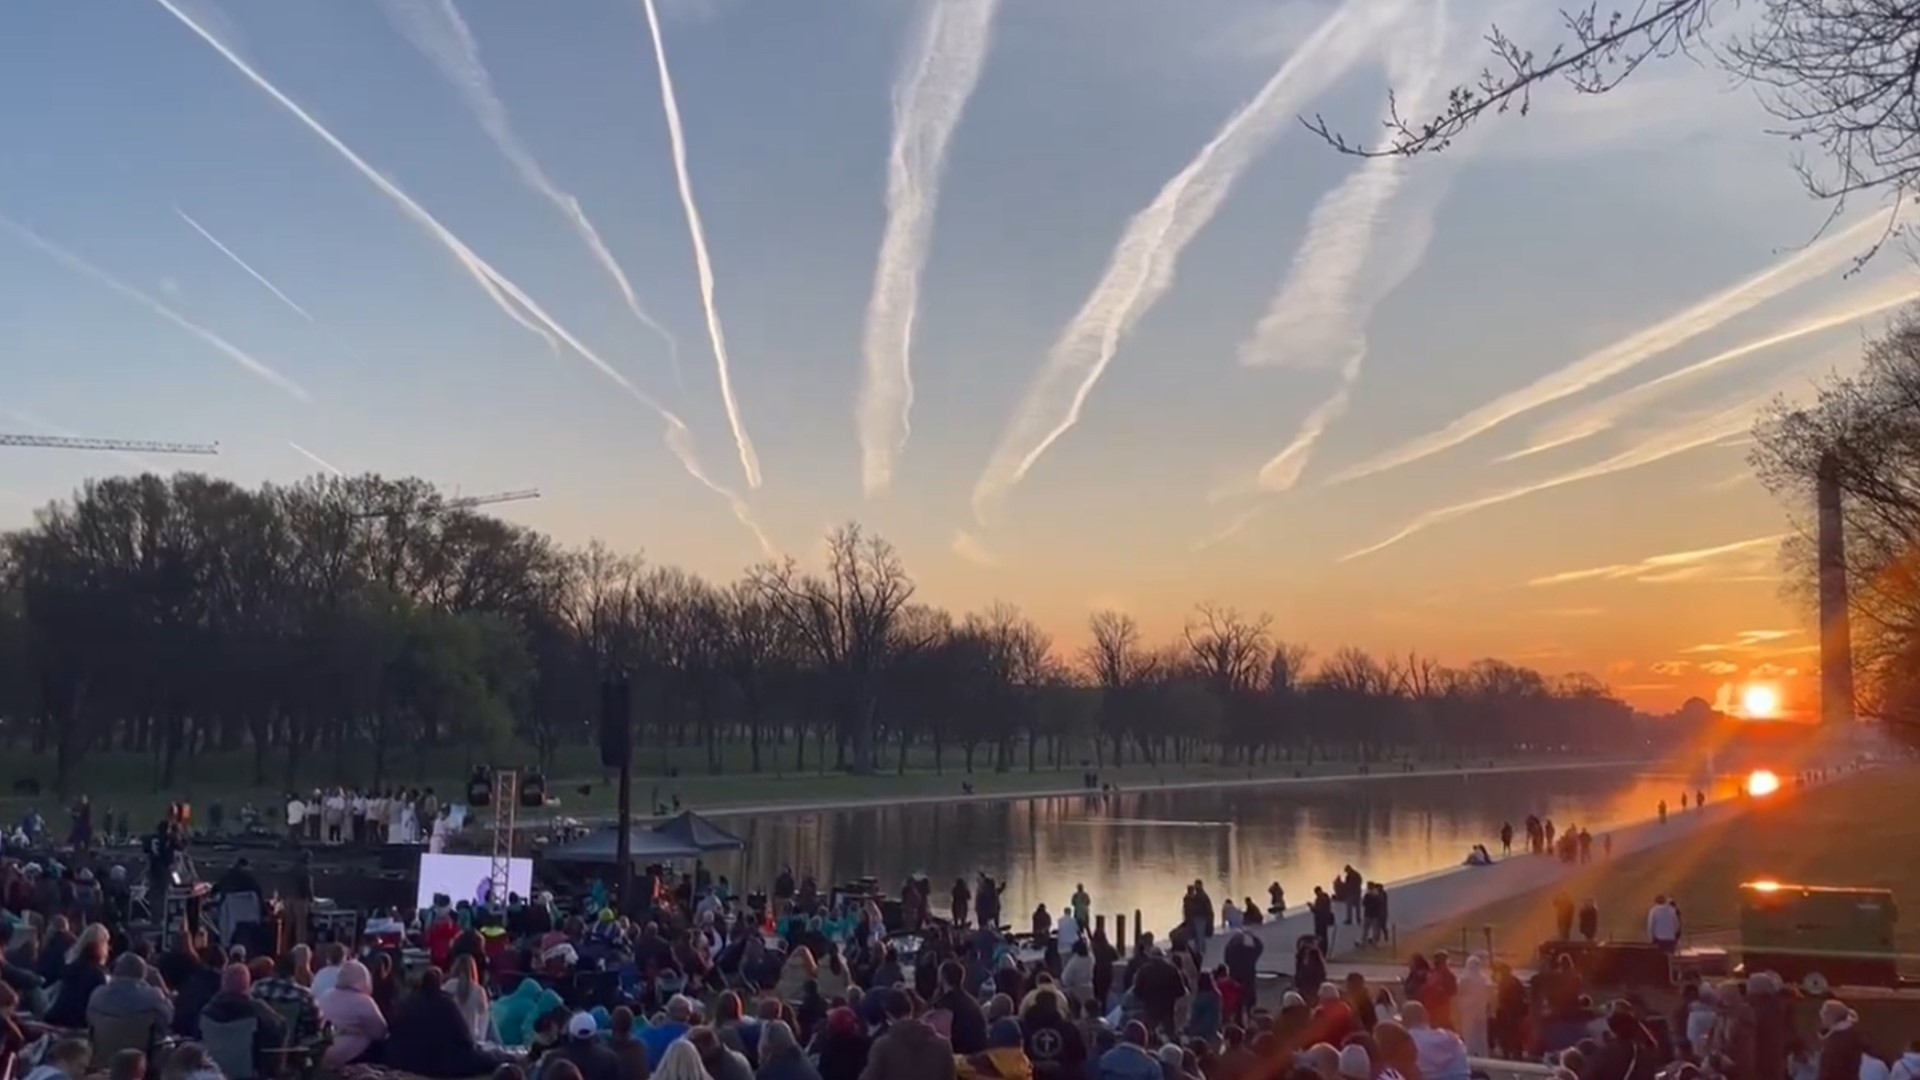 It's a more than four decade long tradition in the District - sunrise service on Easter Sunday on the steps of the Lincoln Memorial.